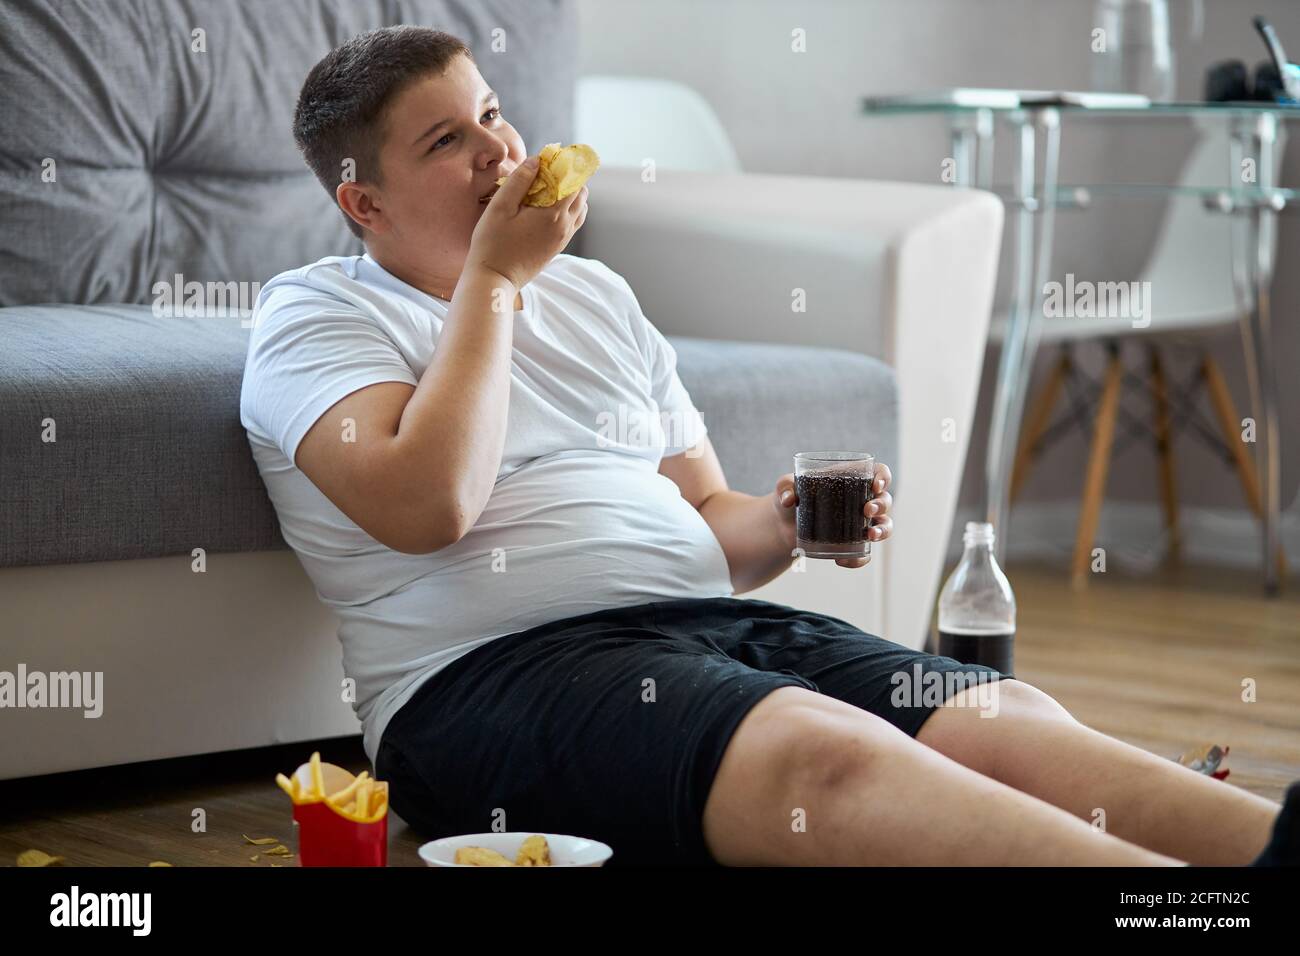 fat overweight teenager boy has bad nutrition, eat unhealthy food. sit on the floor eating junk food and watching tv Stock Photo